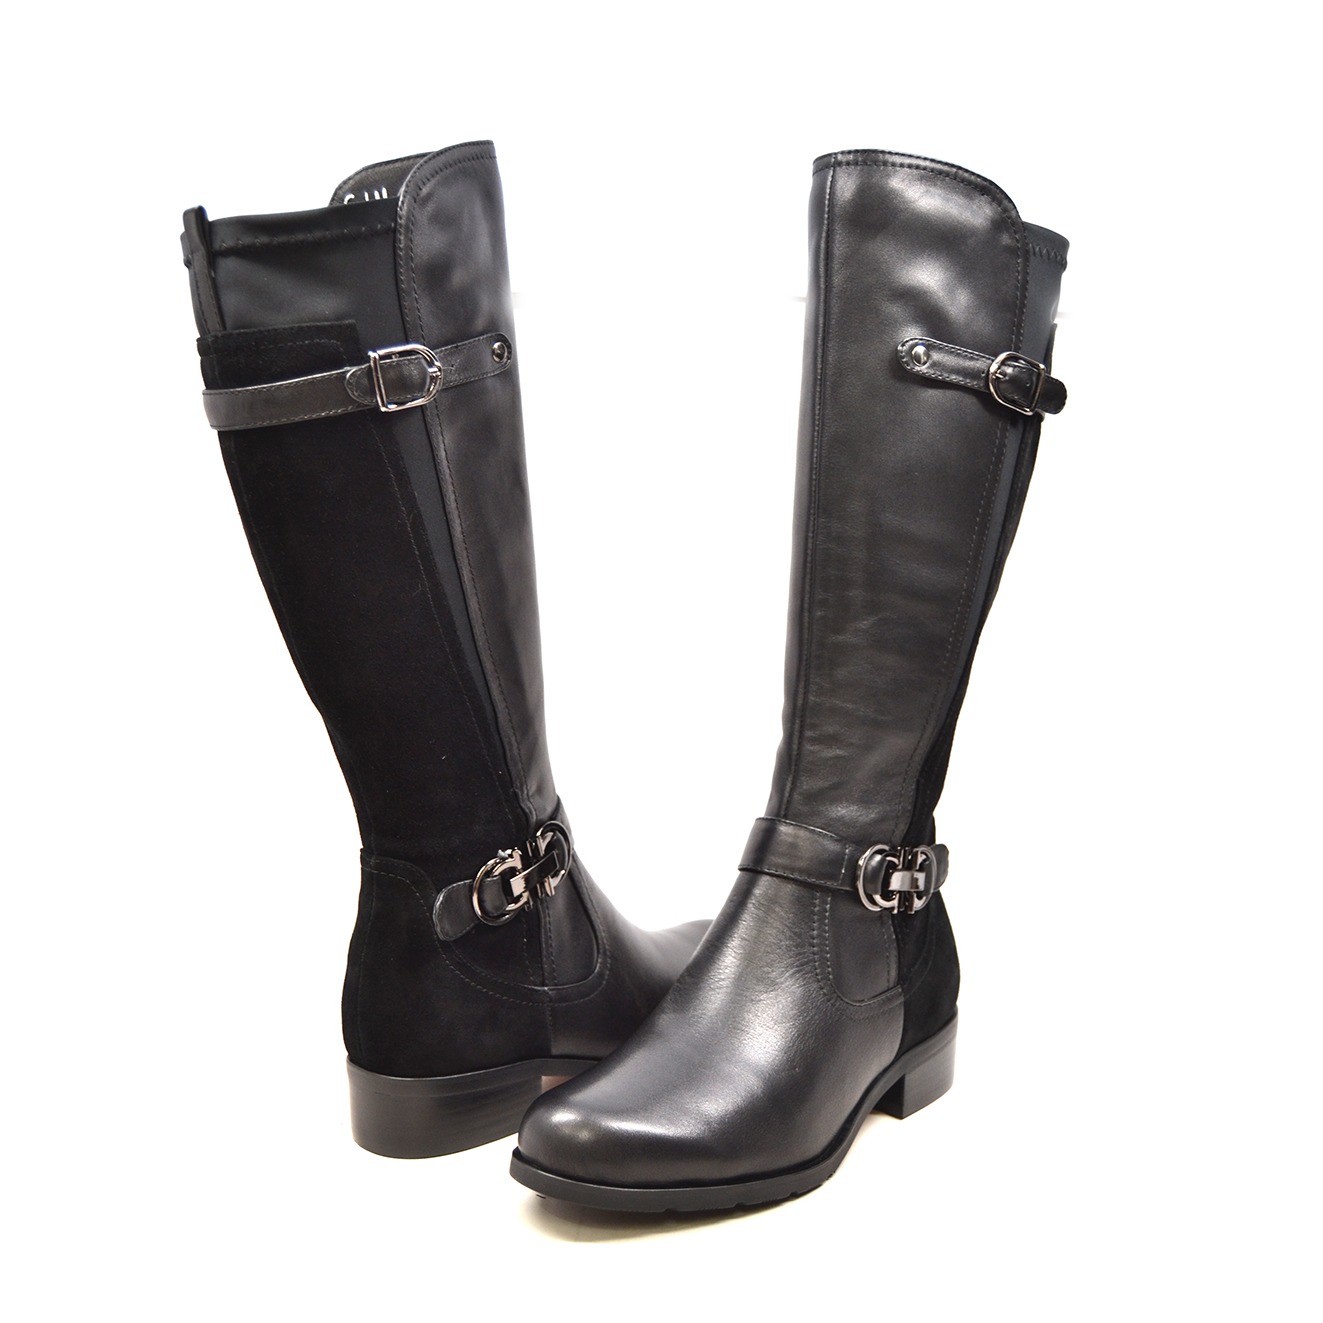 narrow calf black leather boots